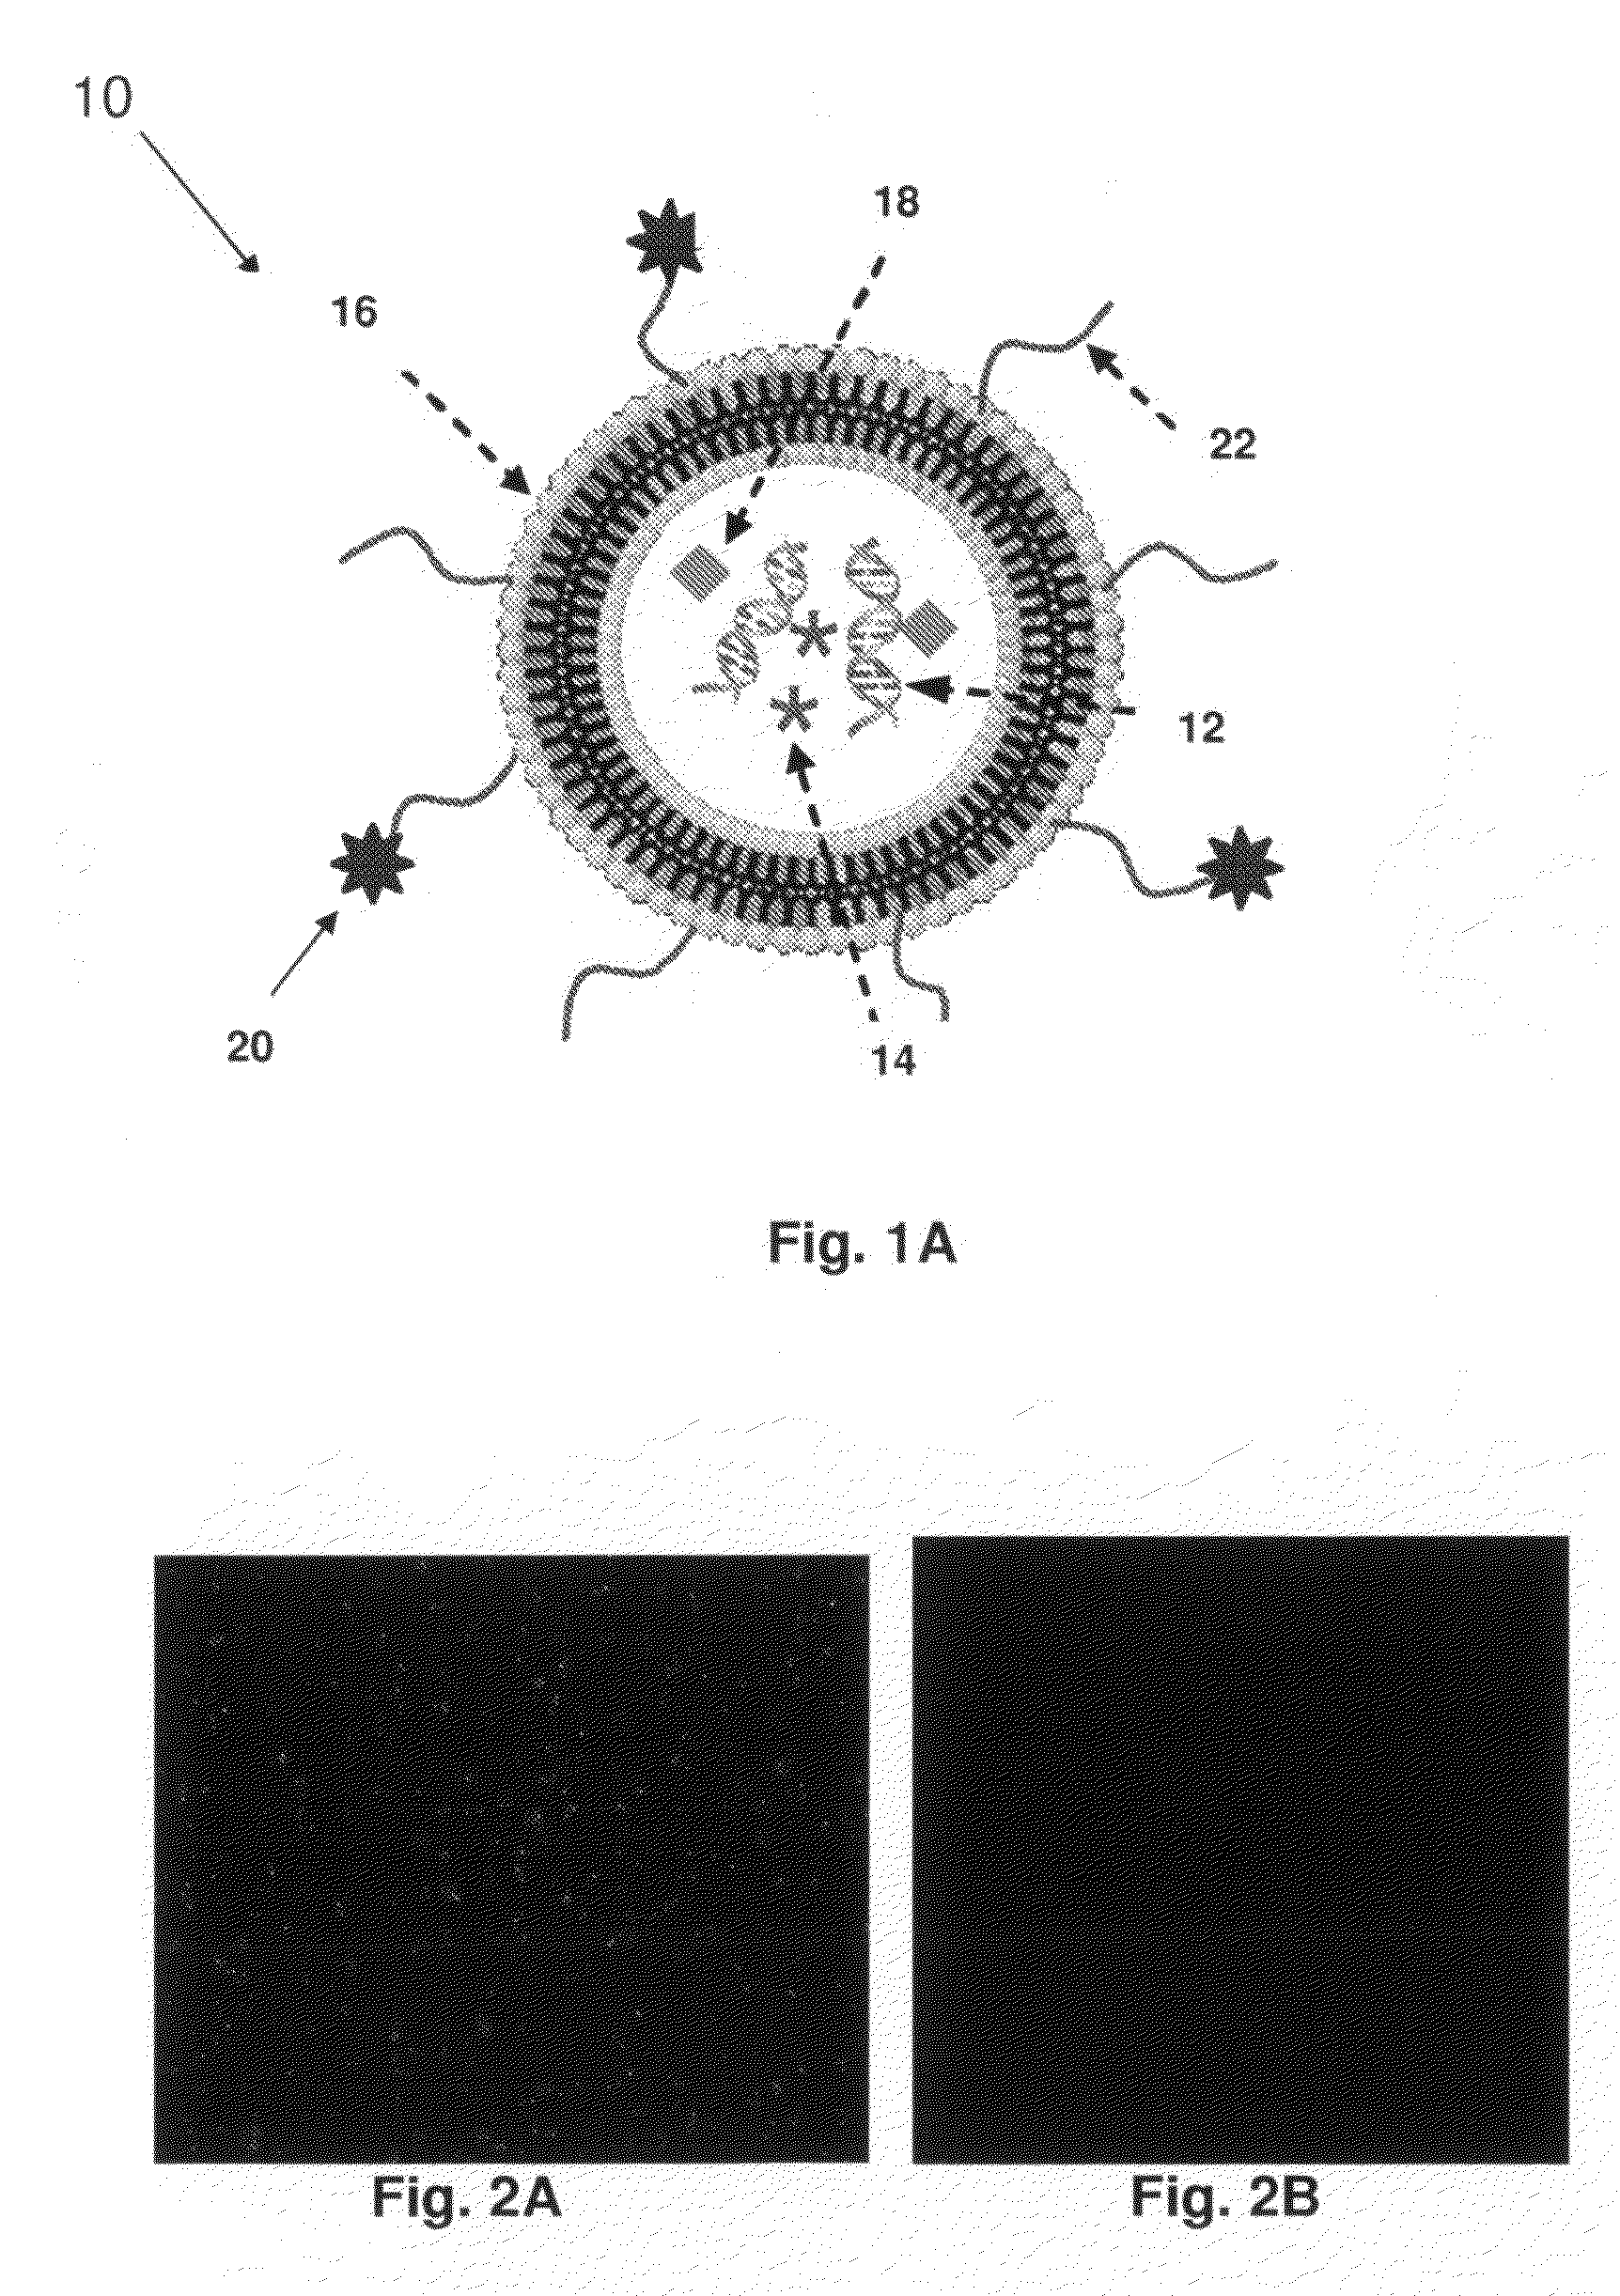 Lipid Nanoparticle Compositions and Methods of Making and Using the Same